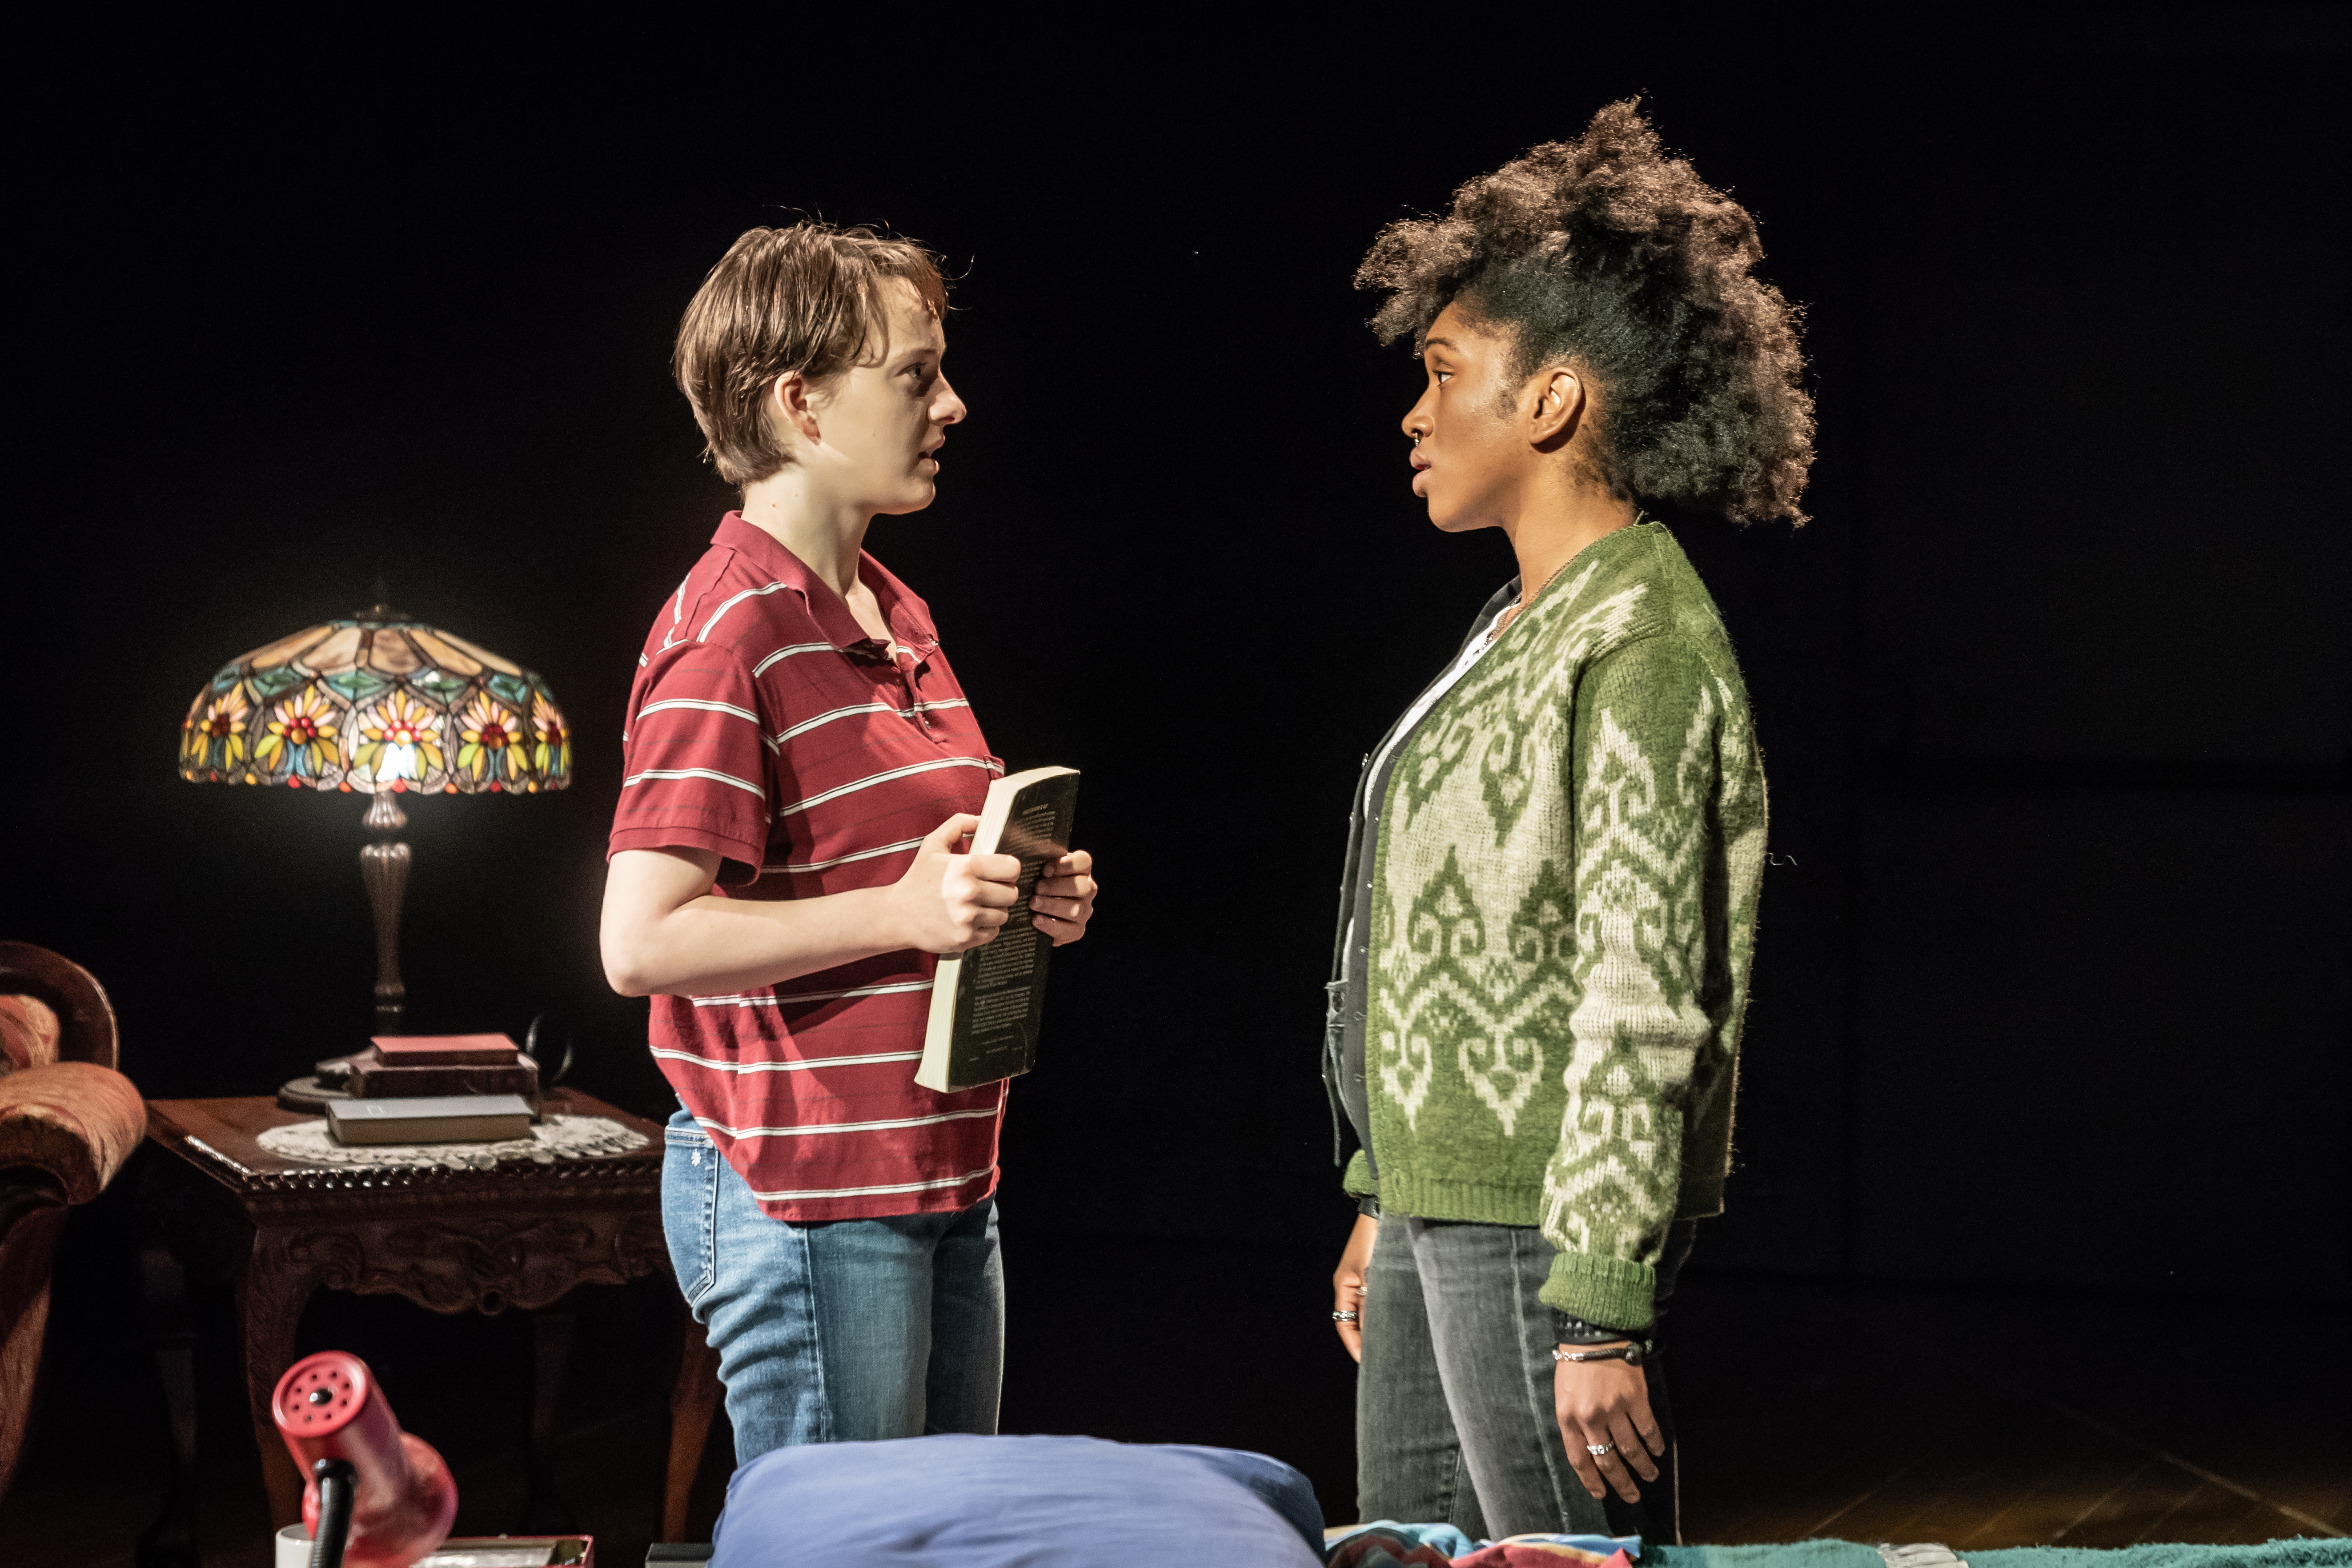 FUN HOME - Music by Jeanine Tesori, Book & Lyrics by Lisa Kron - Based on the graphic novel by Alison Bechdel